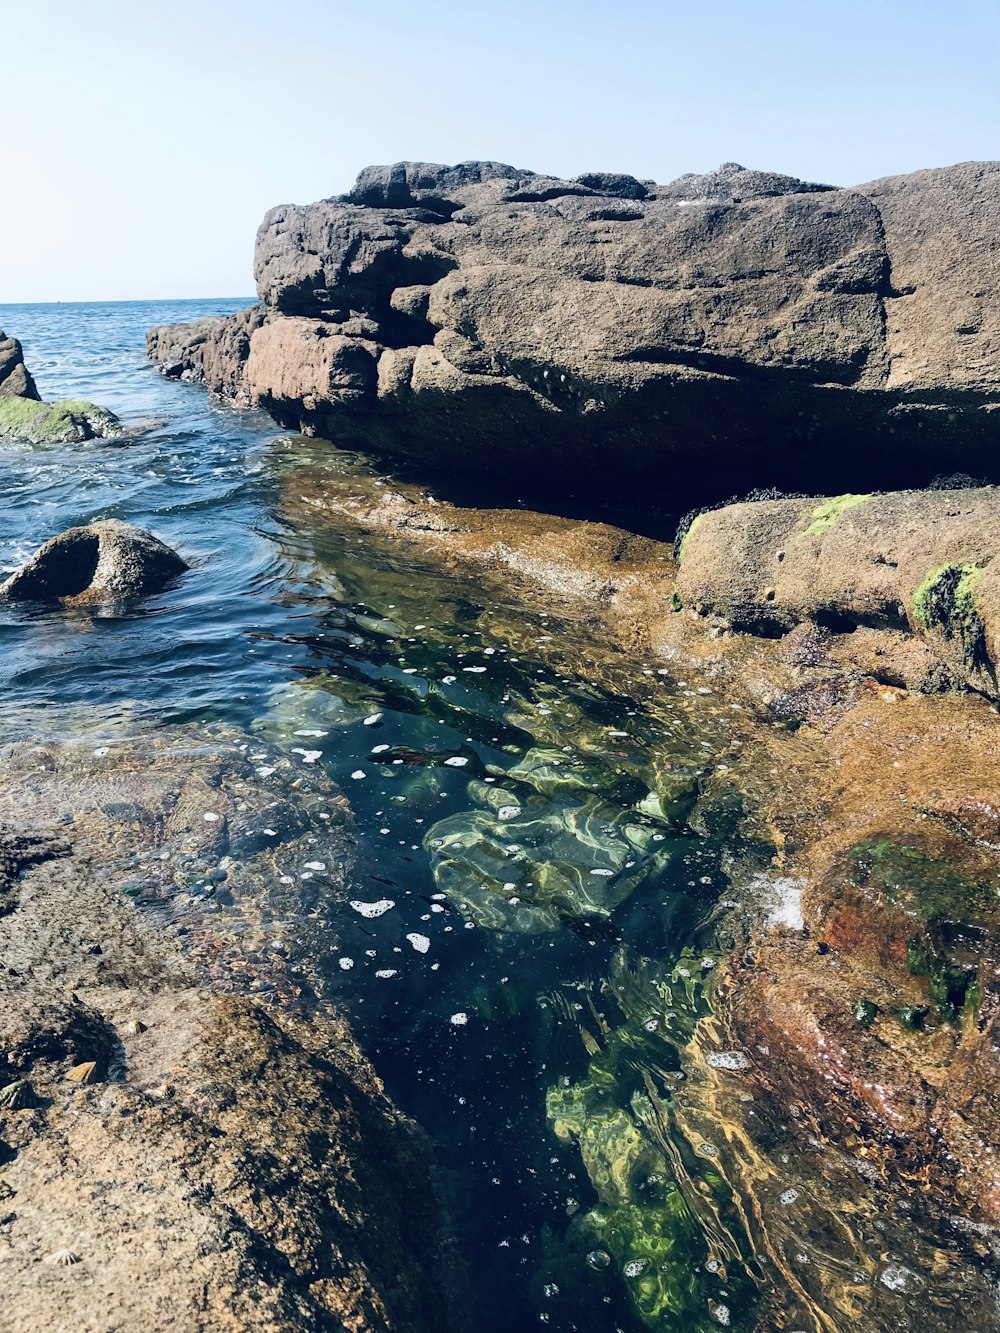 a body of water surrounded by rocks and seaweed